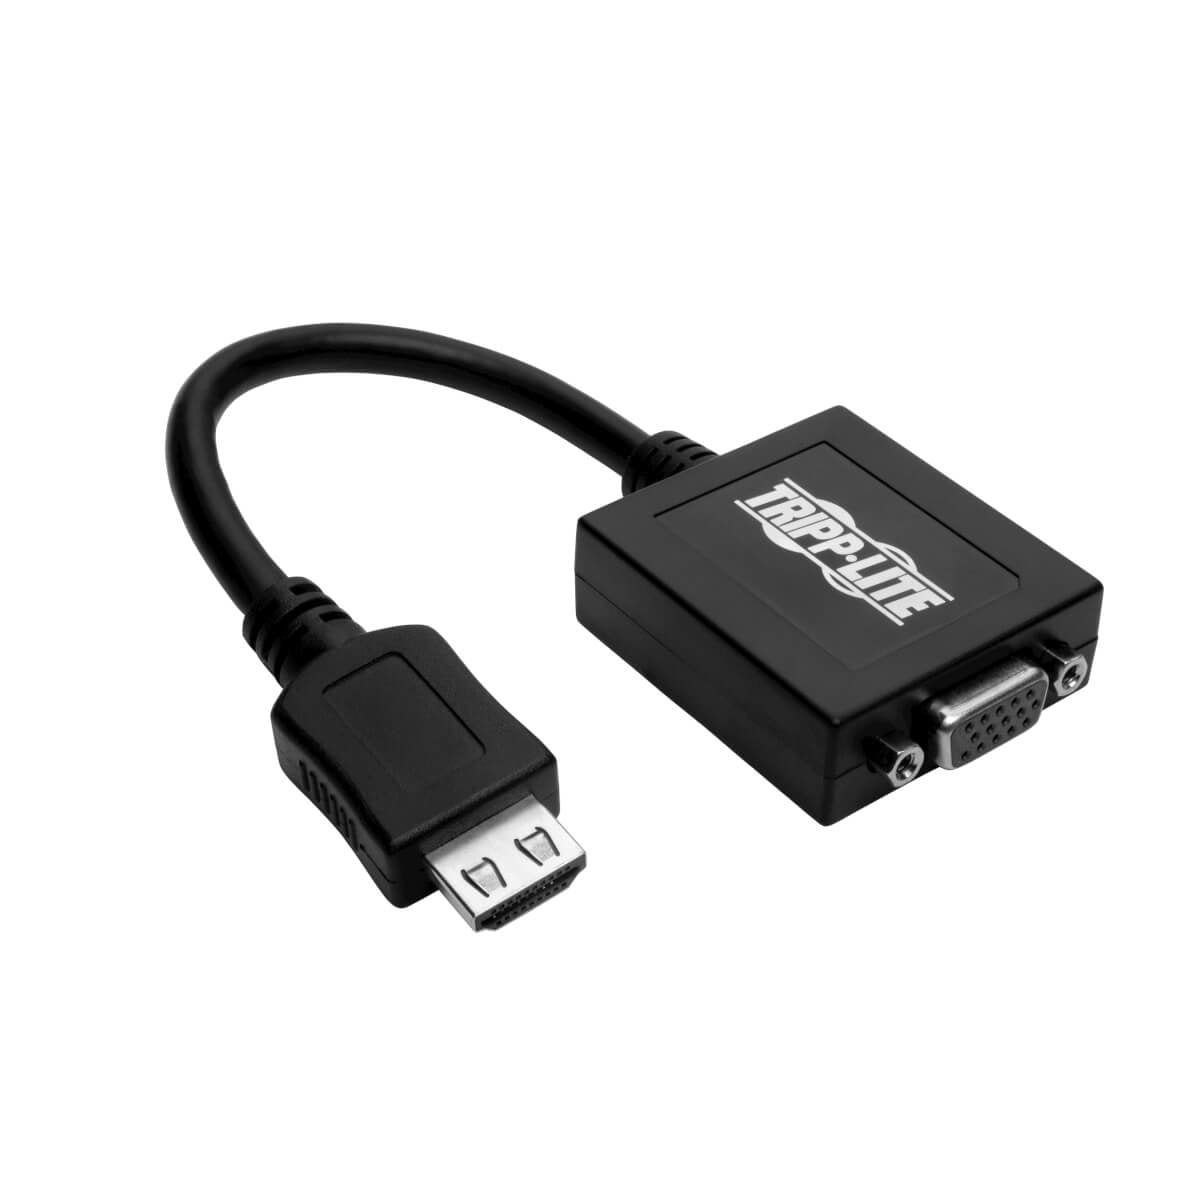 Tripp Lite P131-06N Hdmi To Vga With Audio Converter Cable Adapter For Ultrabook/Laptop/Desktop Pc, (M/F), 6-In. (15.24 Cm)